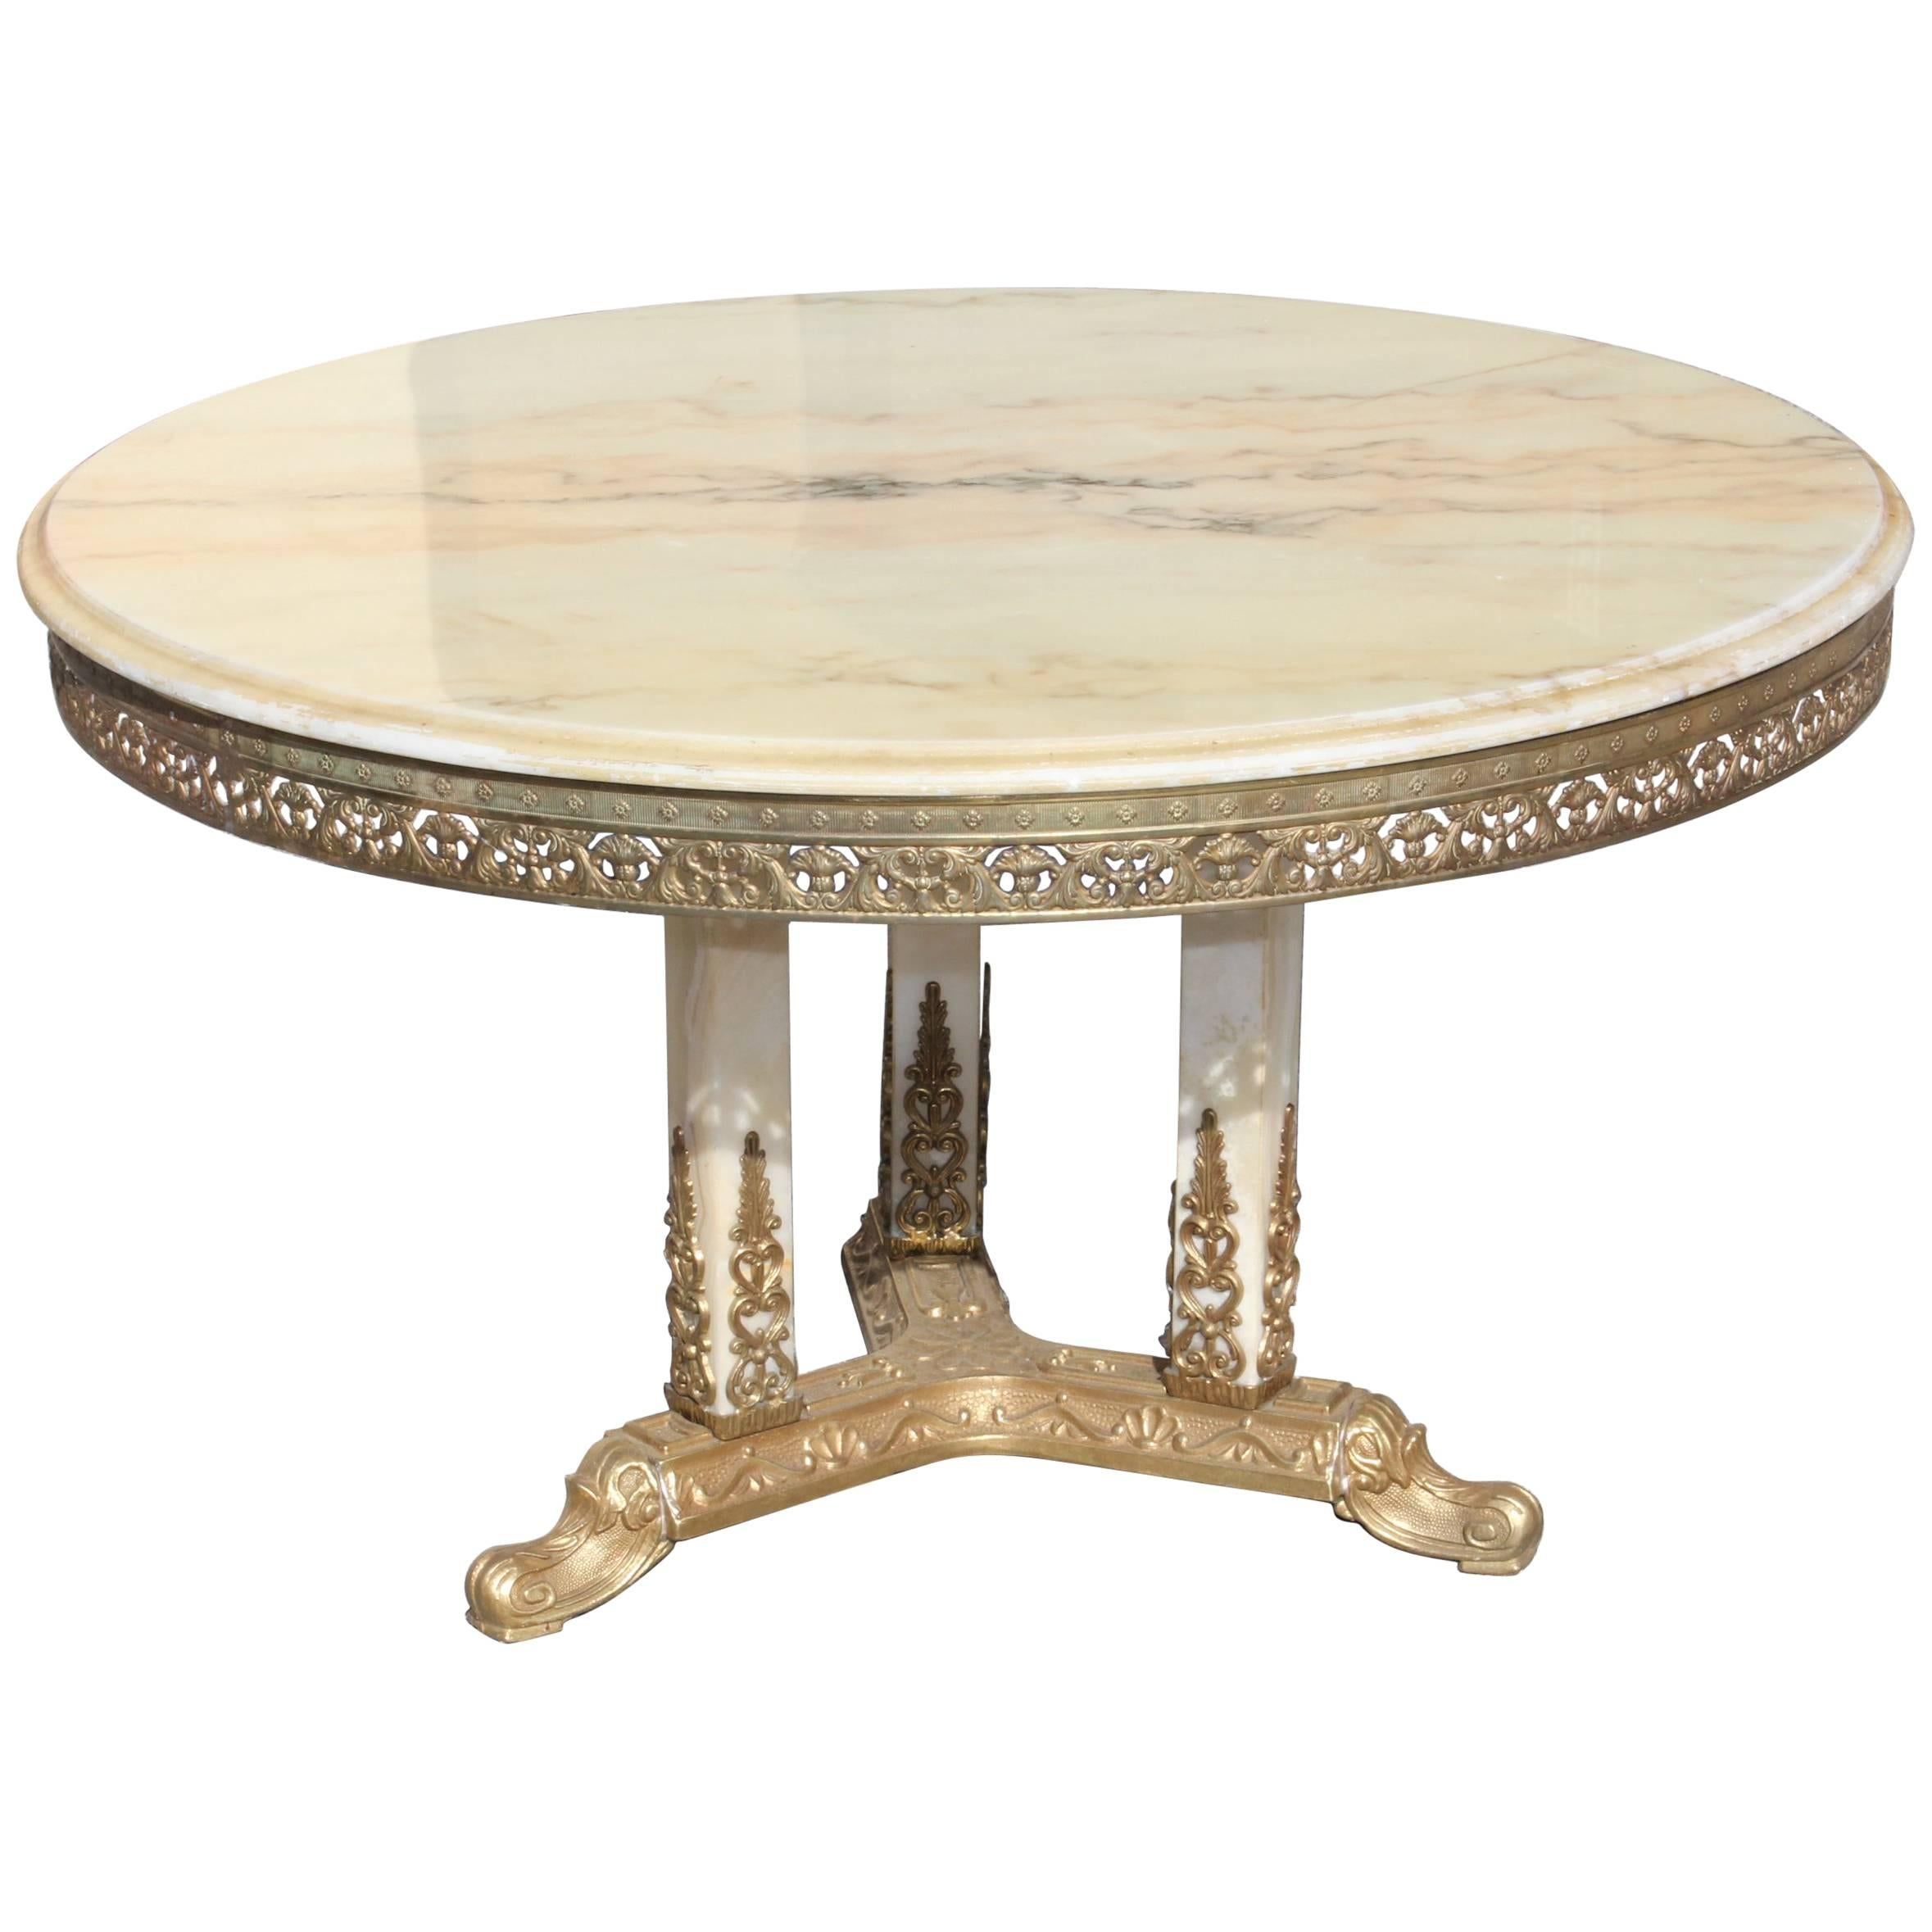 Beautiful French Maison Jansen Round Coffee or Cocktail Bronze Table